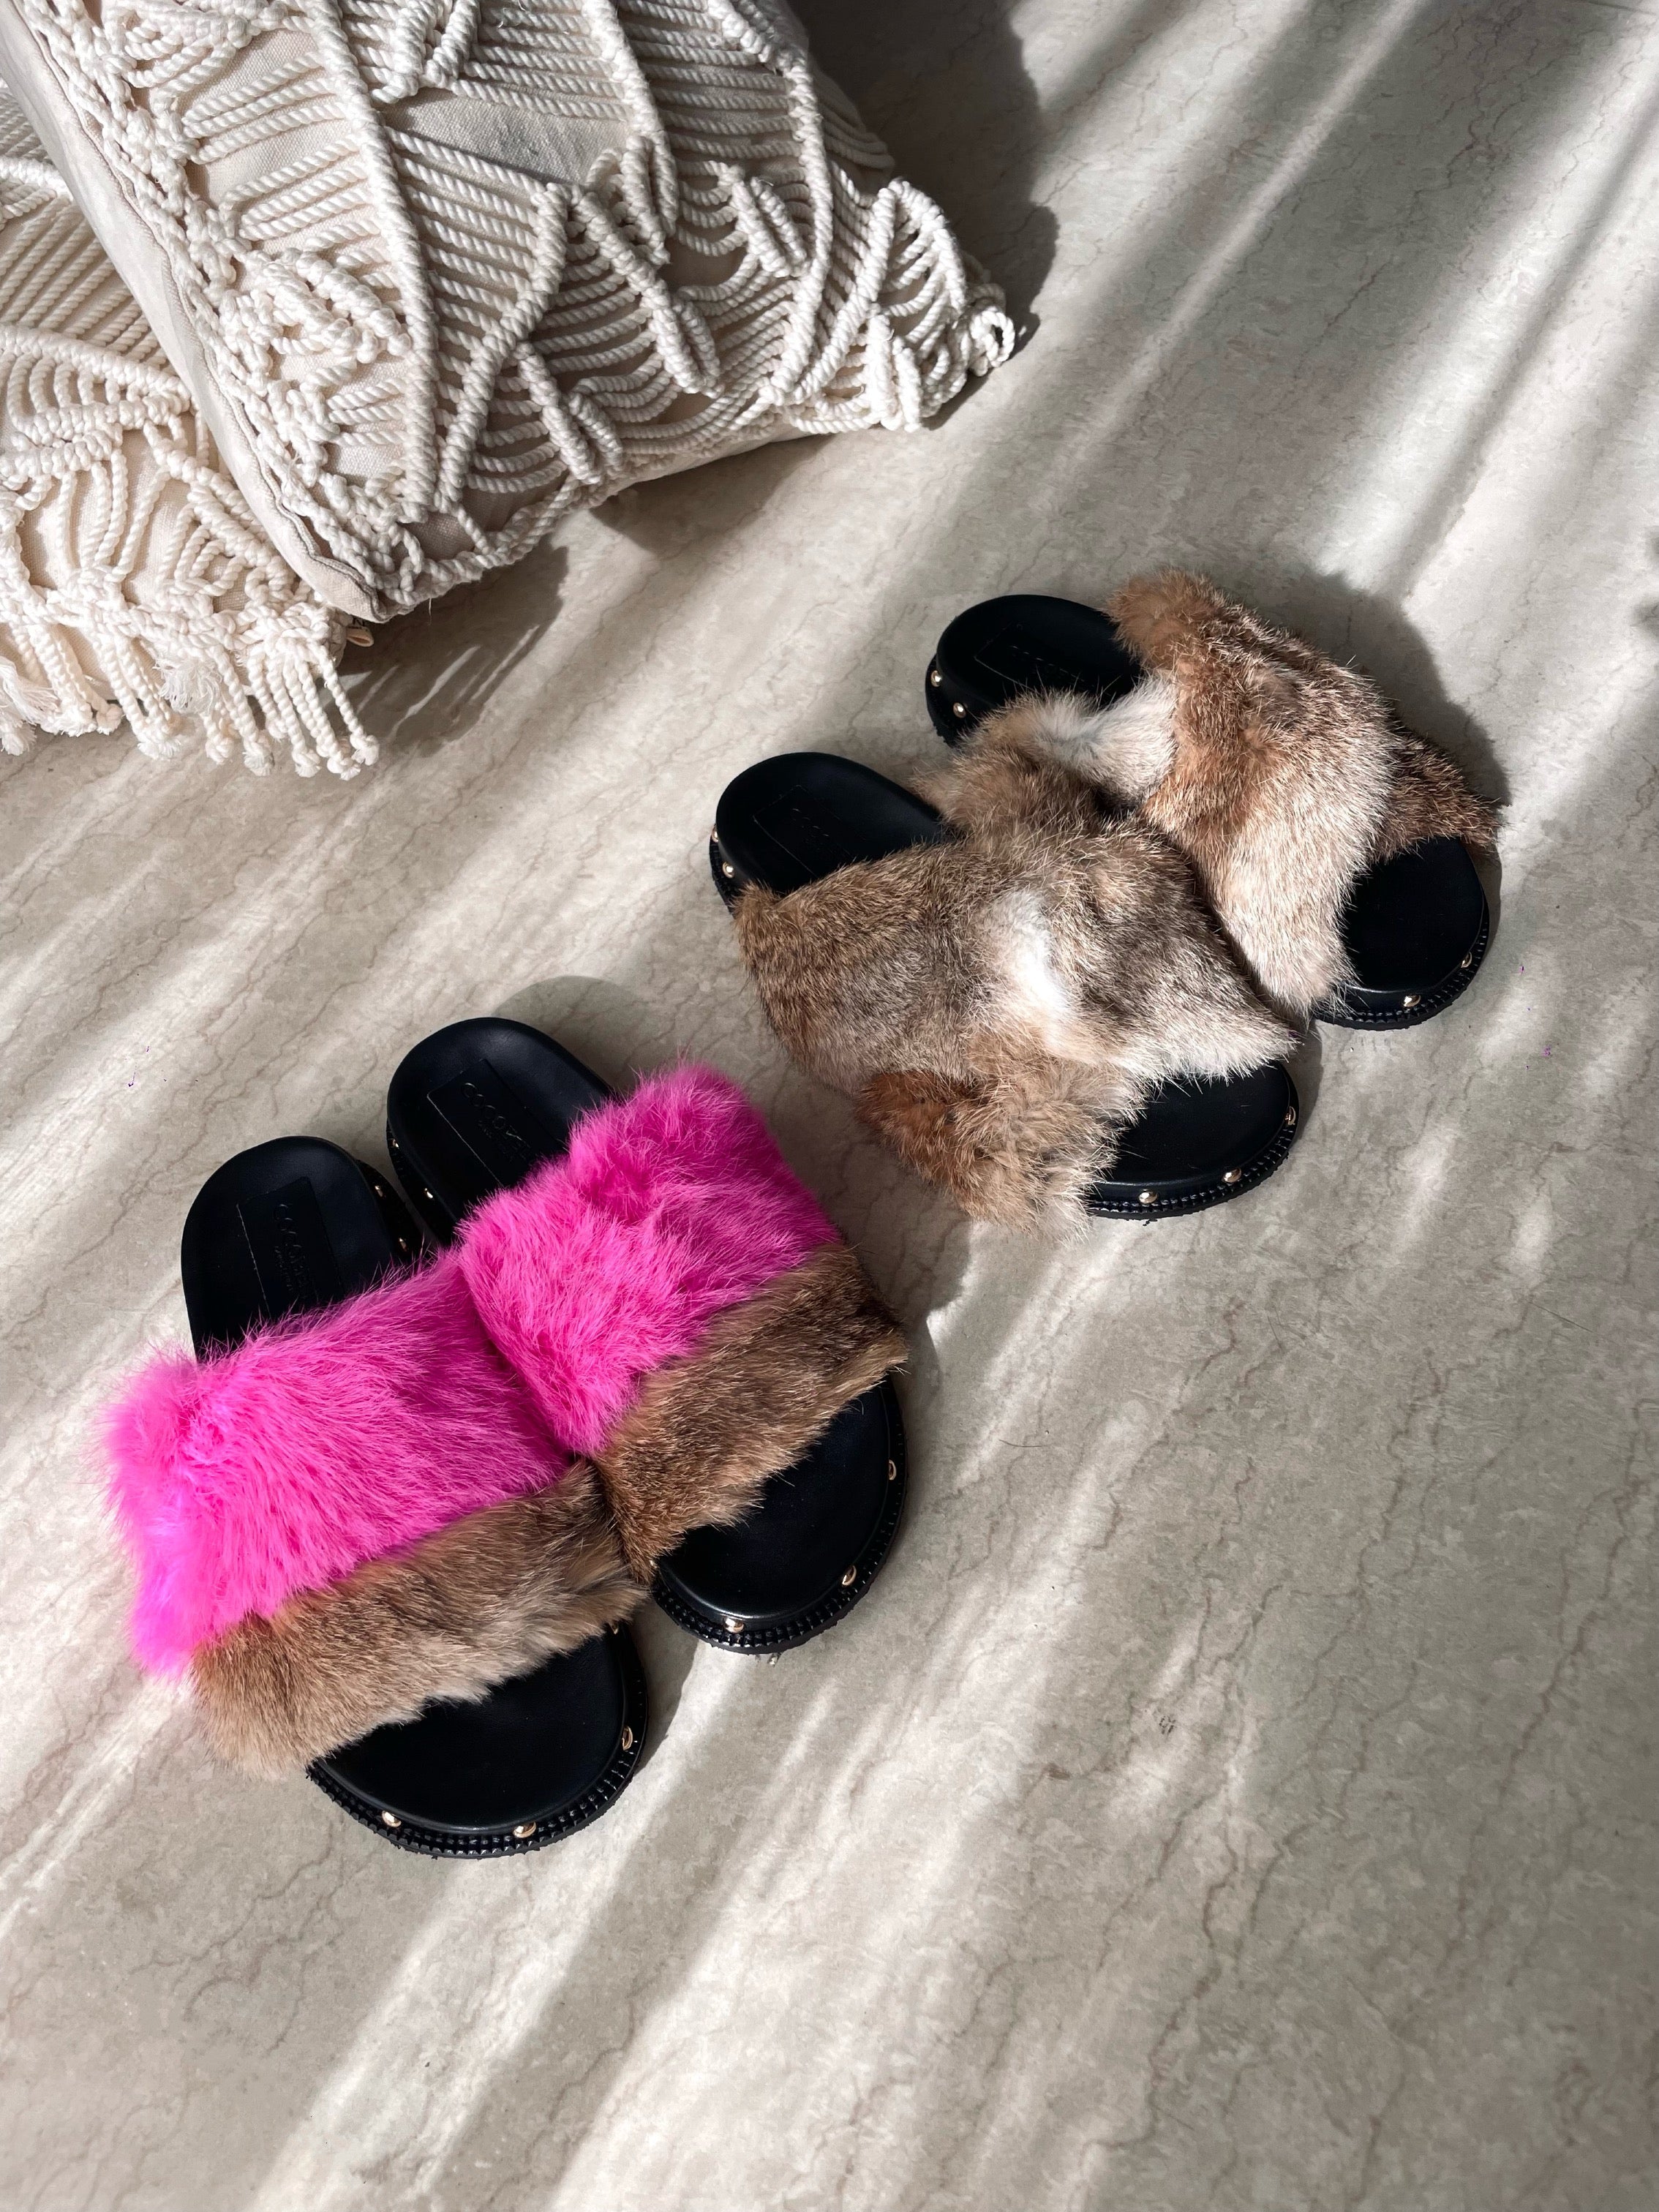 The Lyla 100% Rabbit Fur in Hot Pink Delight